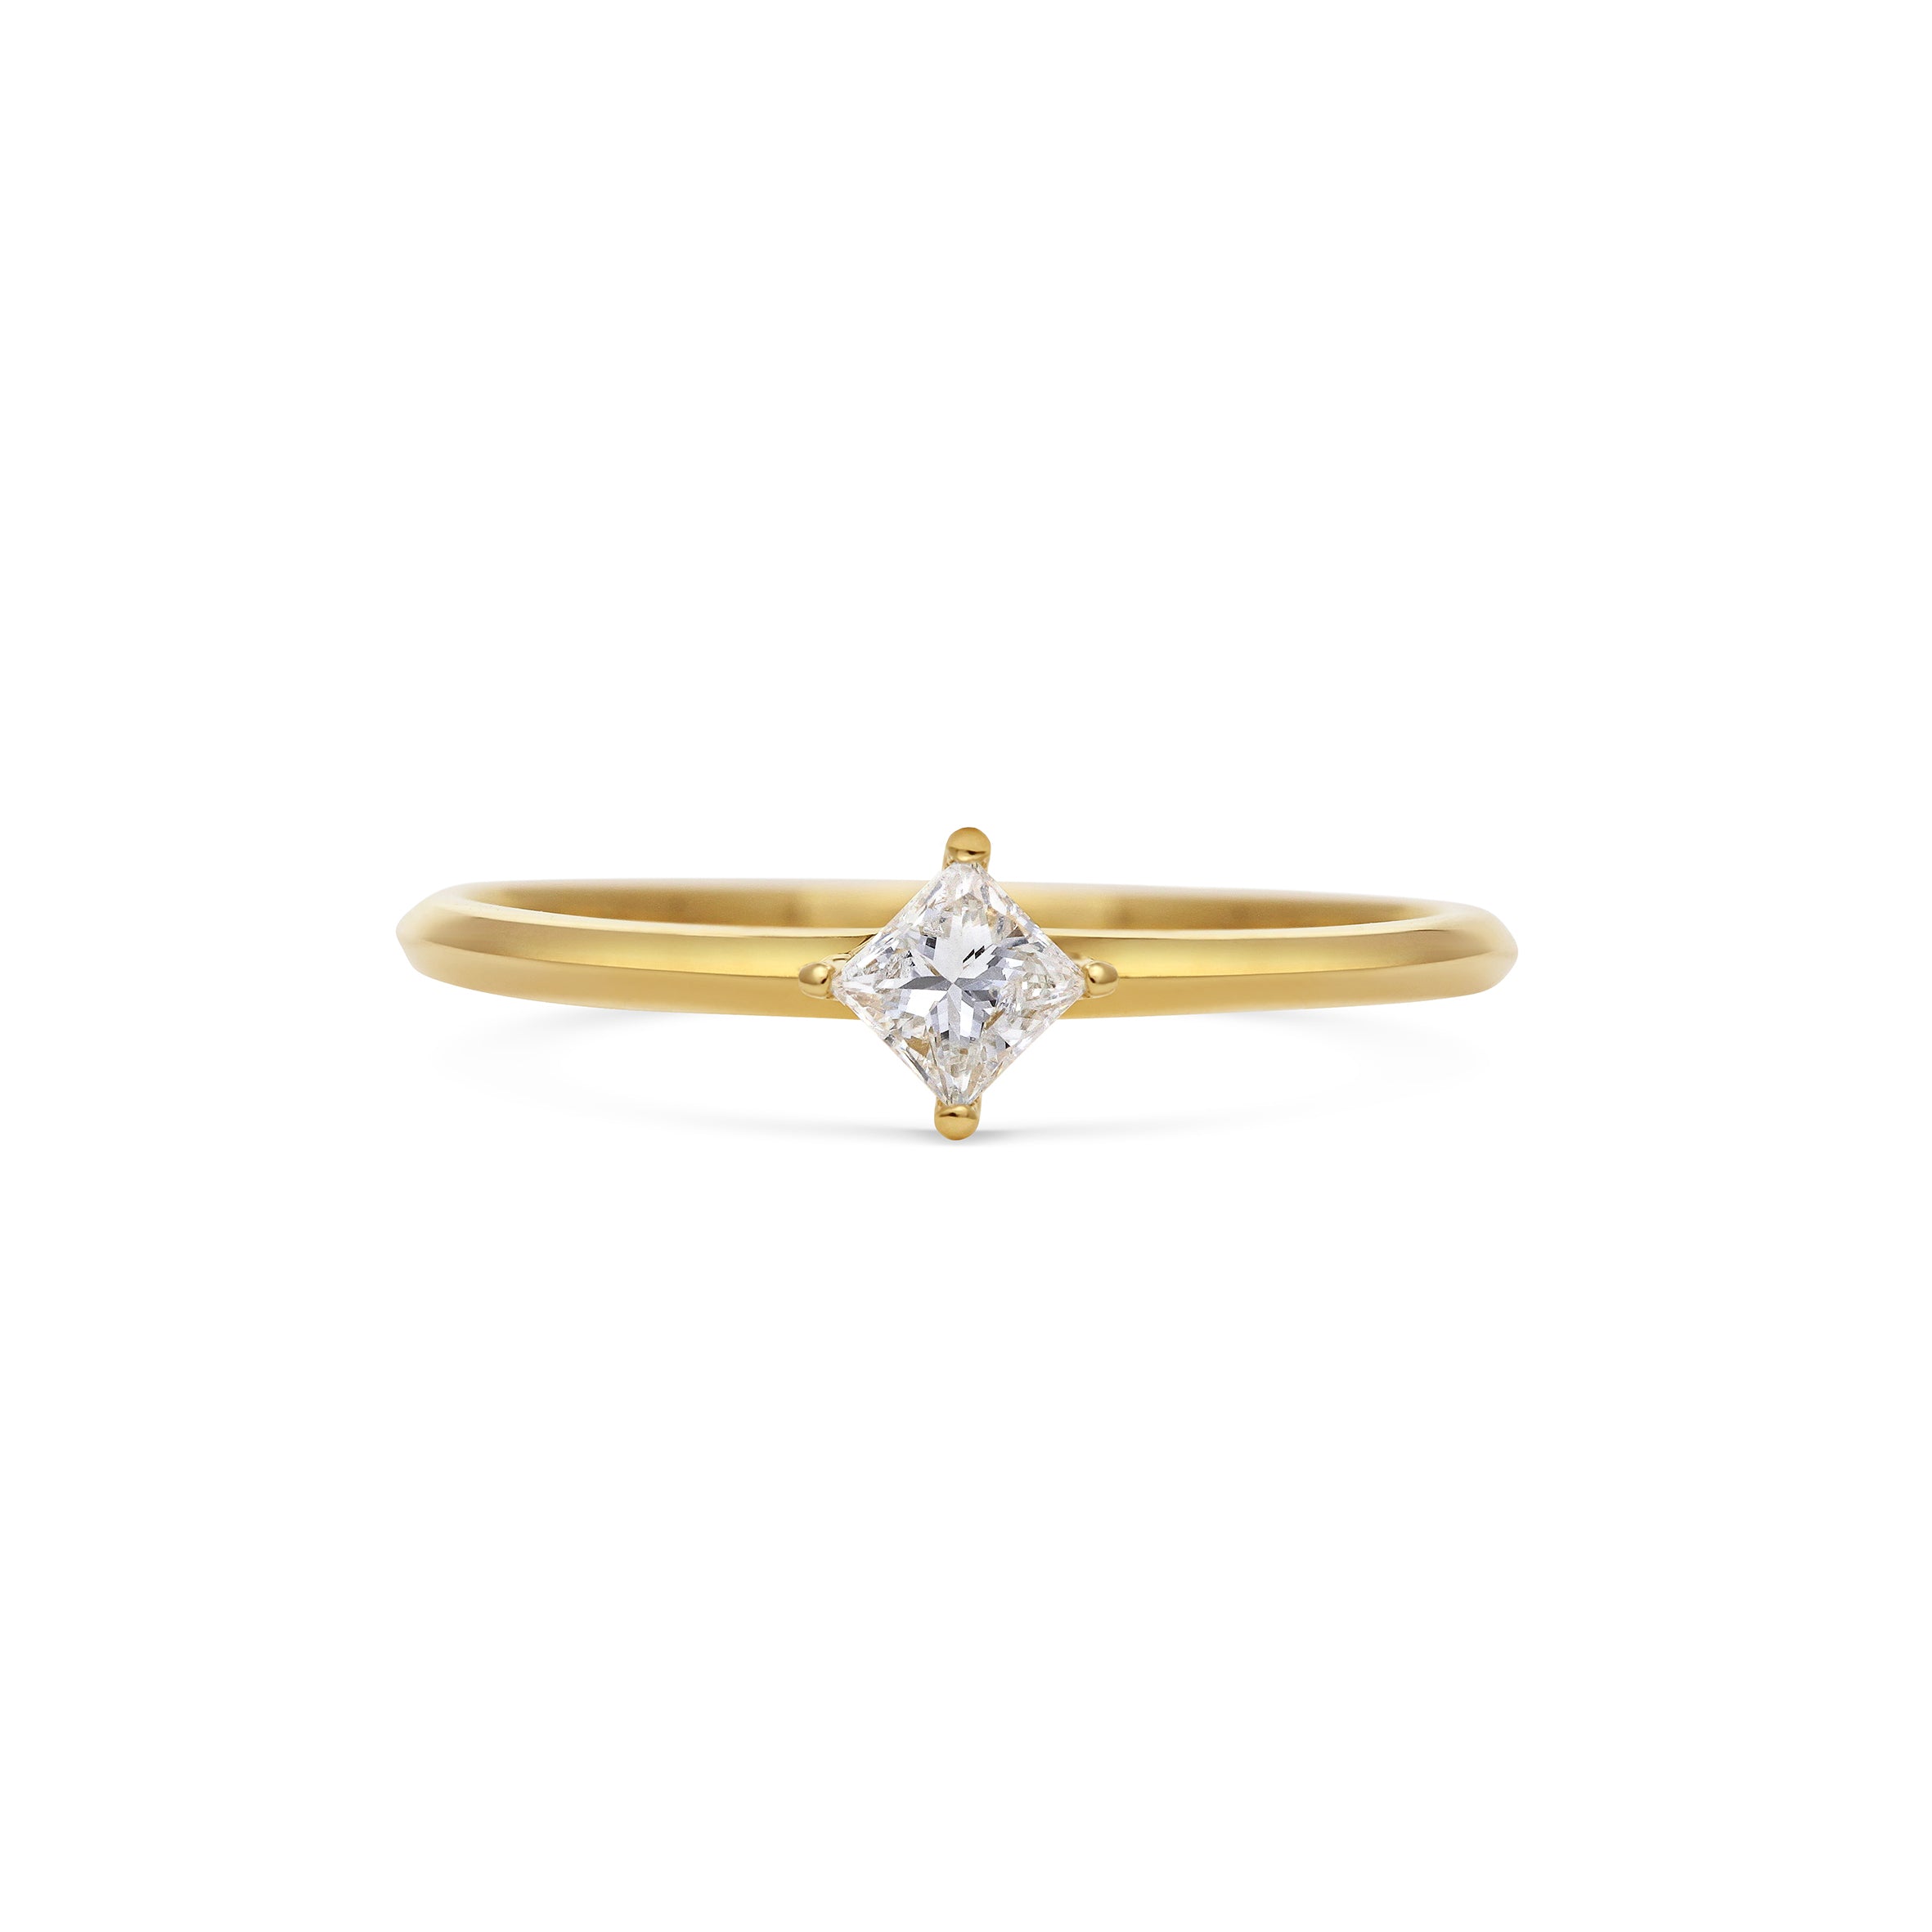 The Milvus Ring by East London jeweller Rachel Boston | Discover our collections of unique and timeless engagement rings, wedding rings, and modern fine jewellery.